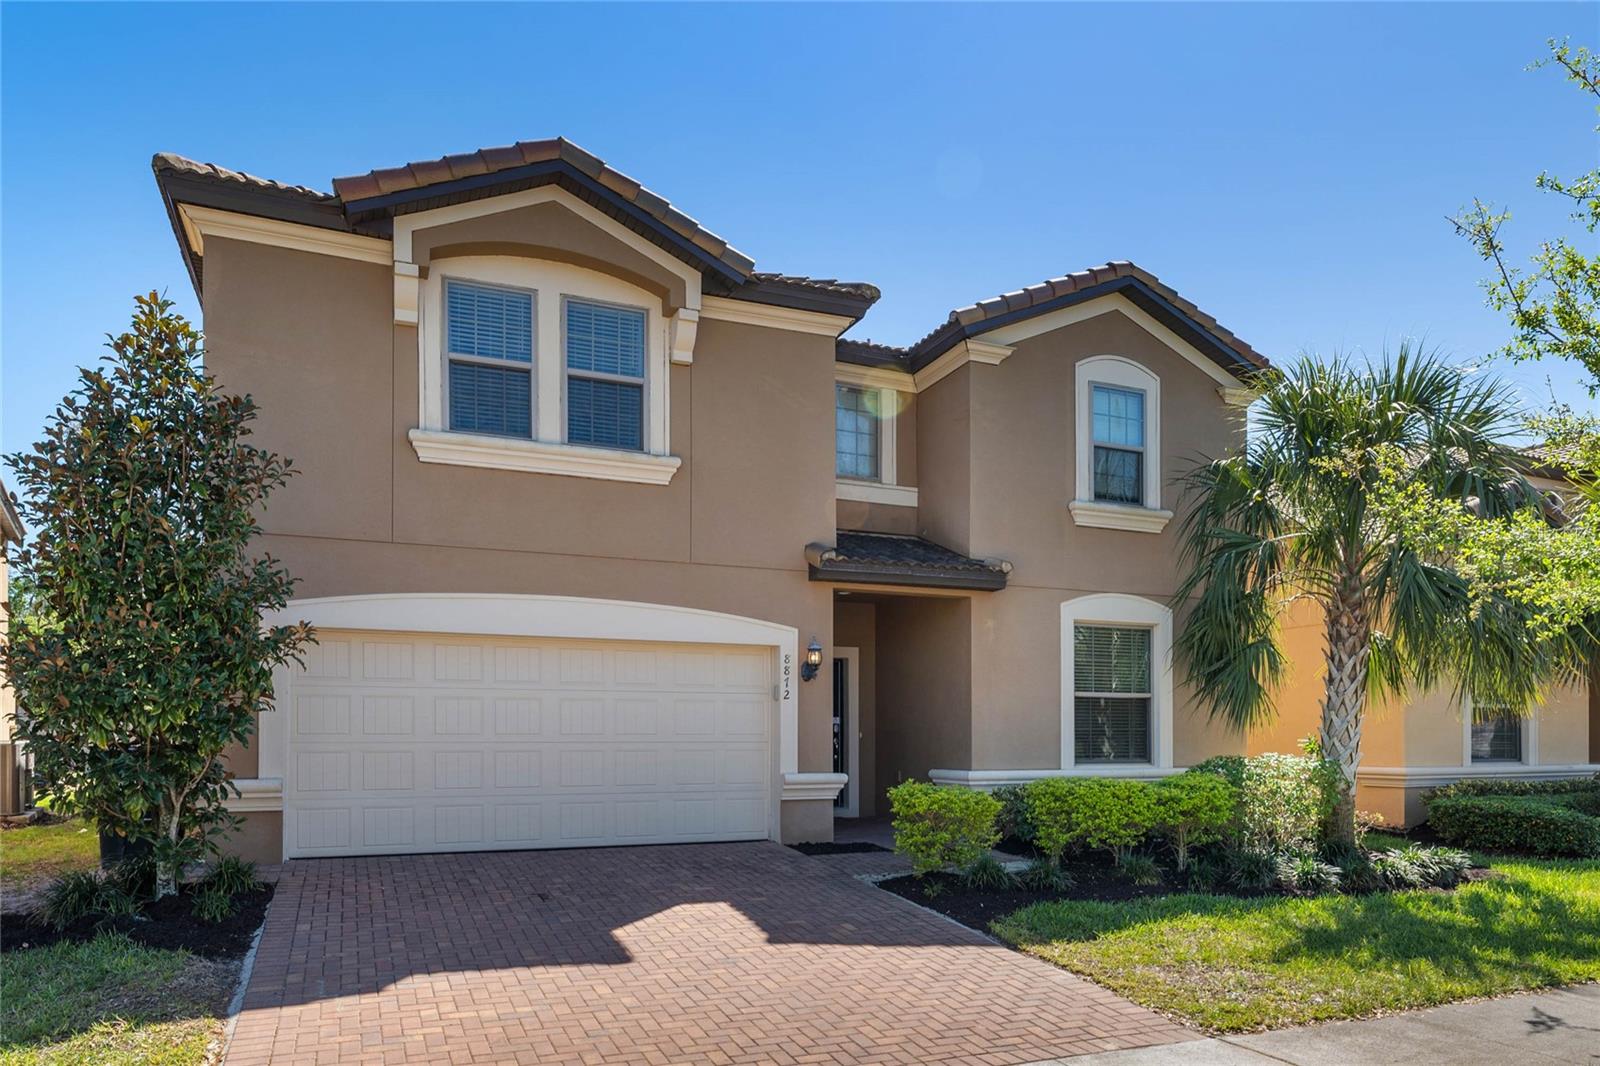 Details for 8872 Bengal Court, KISSIMMEE, FL 34747